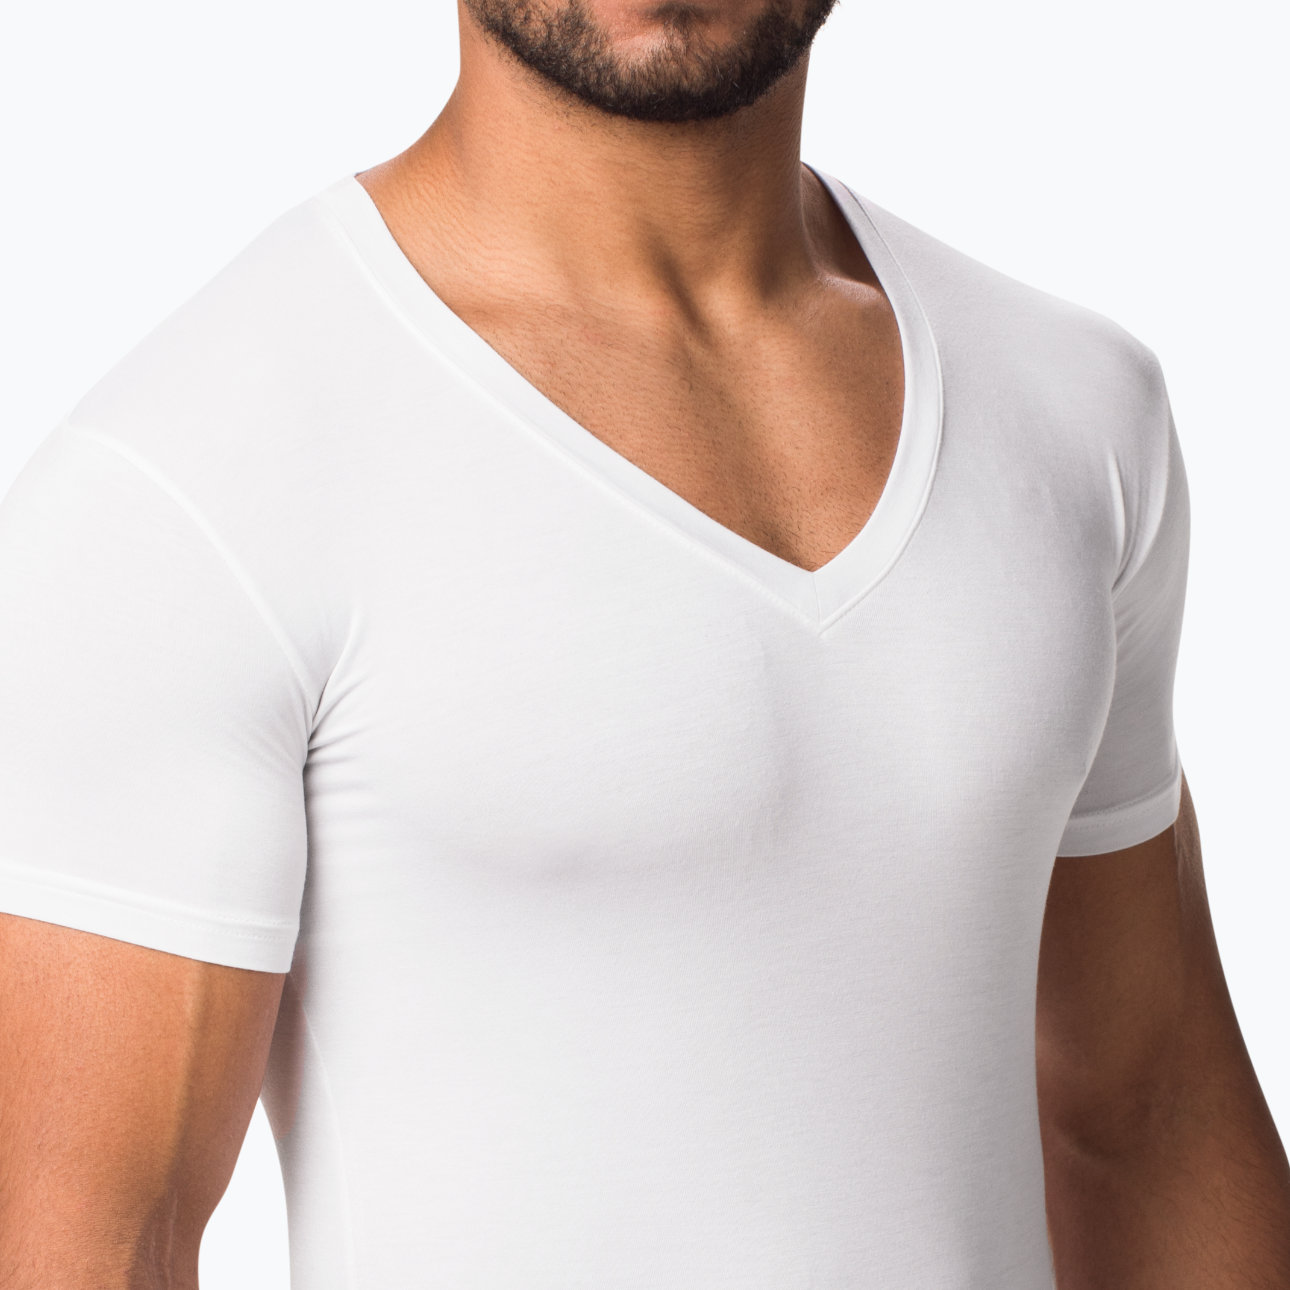 Summer undershirts: our tips on materials & cuts